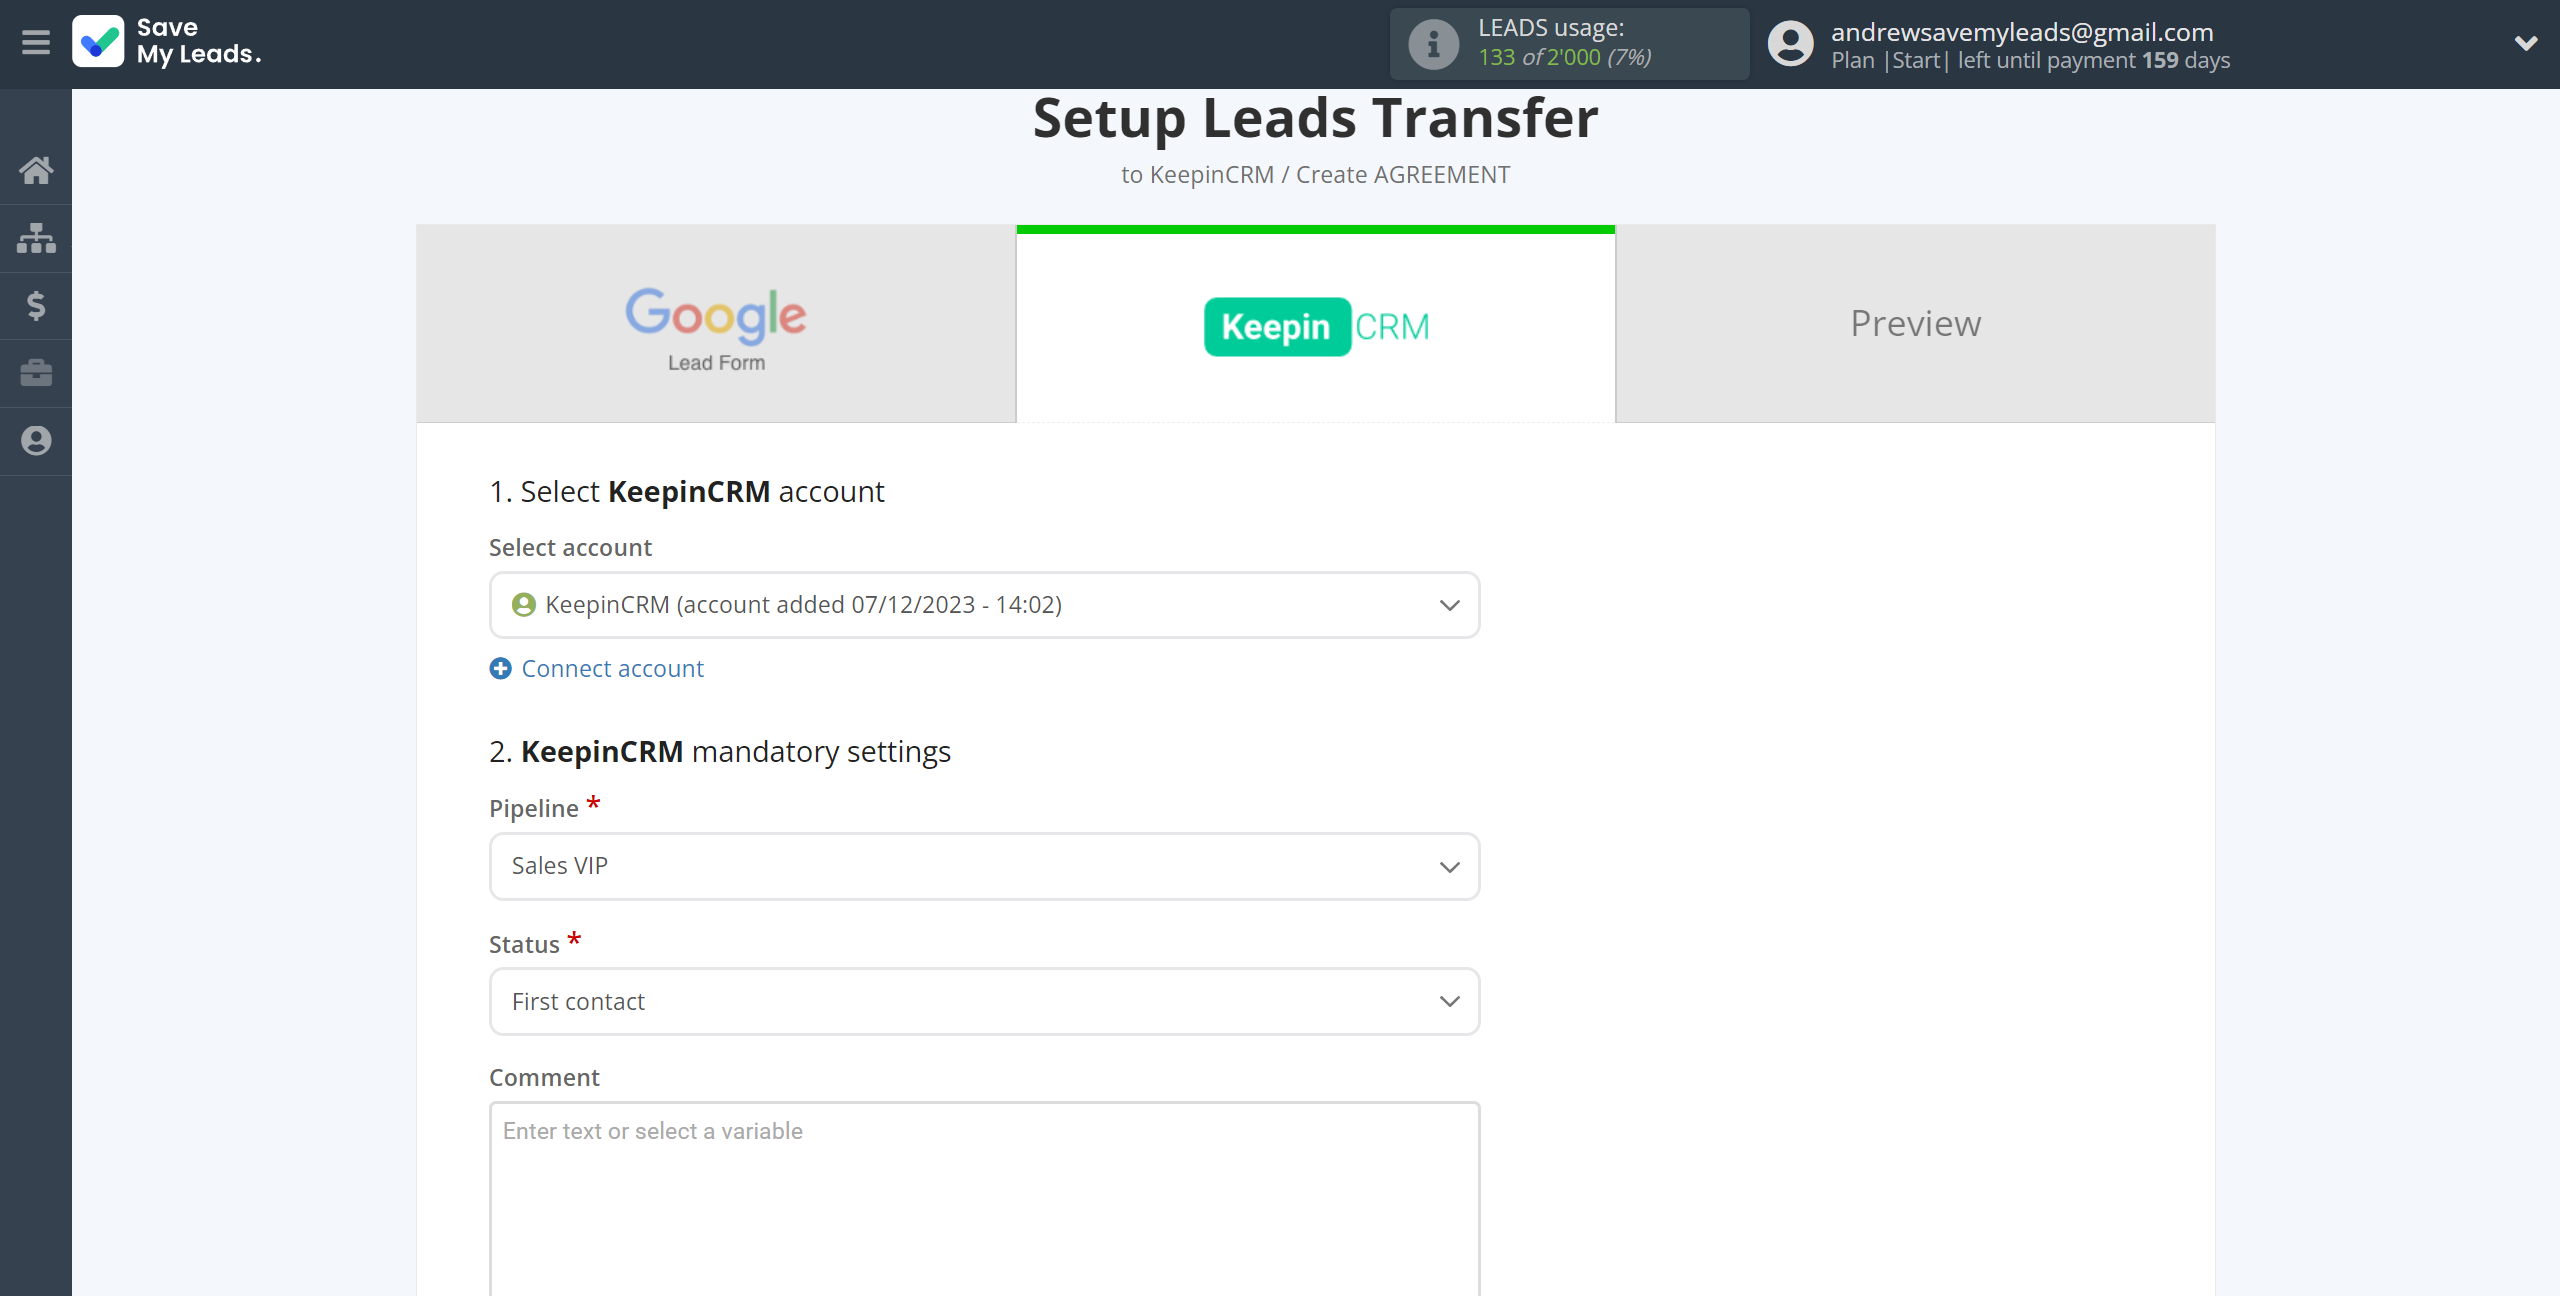 How to Connect Google Lead Form with KeepinCRM Create Agreement | Selecting Pipeline and Status